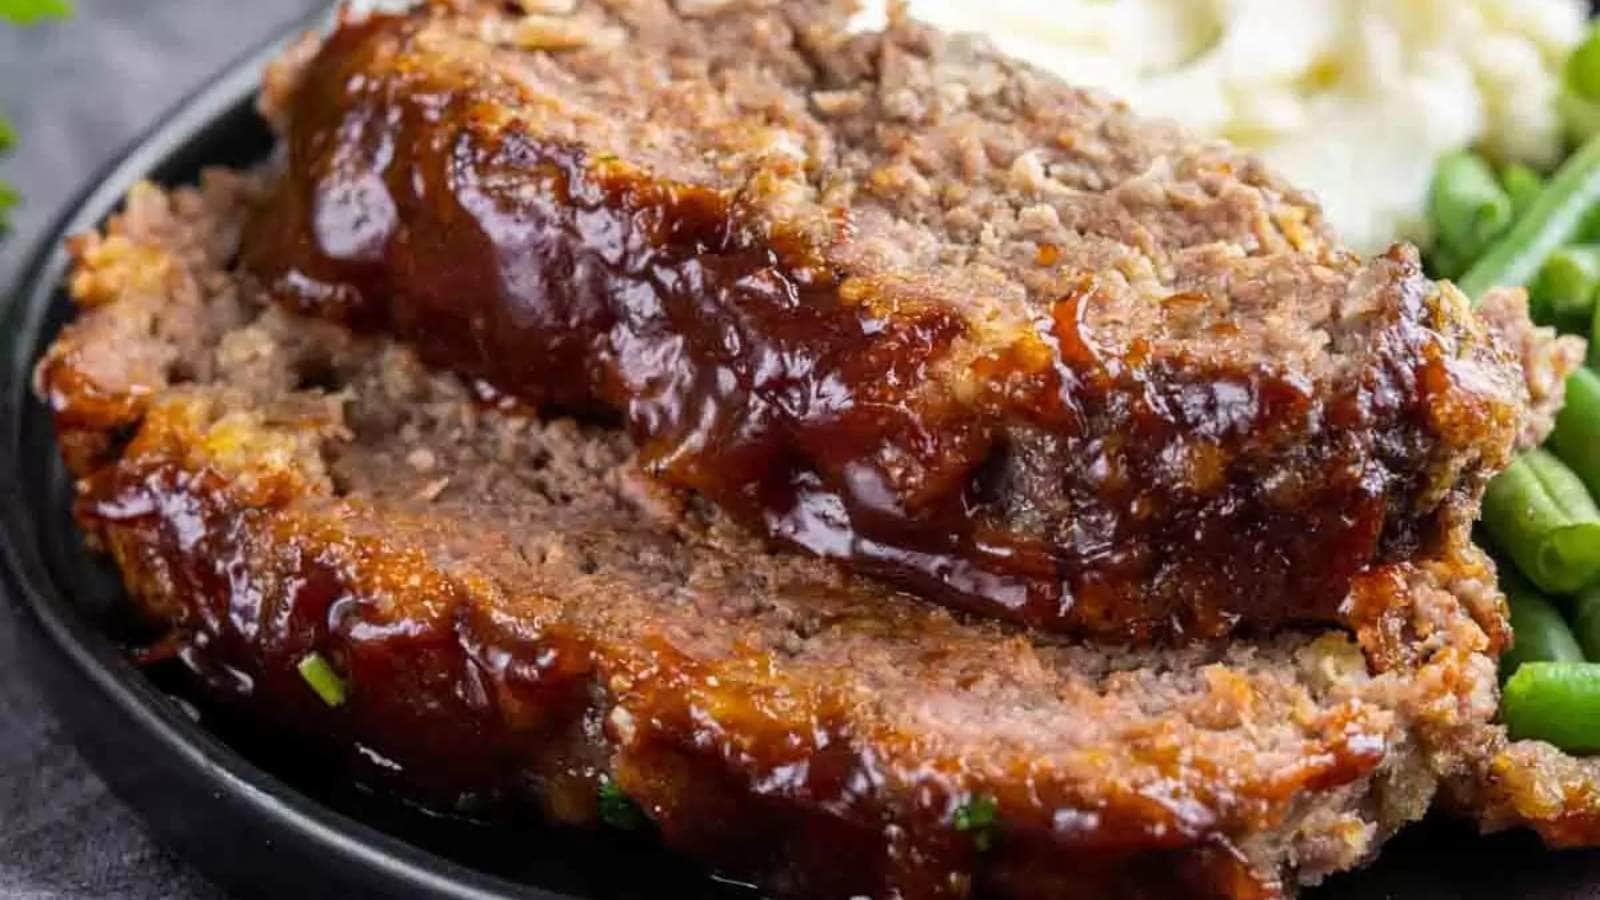 Meatloaf recipe In The Oven recipe by Home Made Intertest.